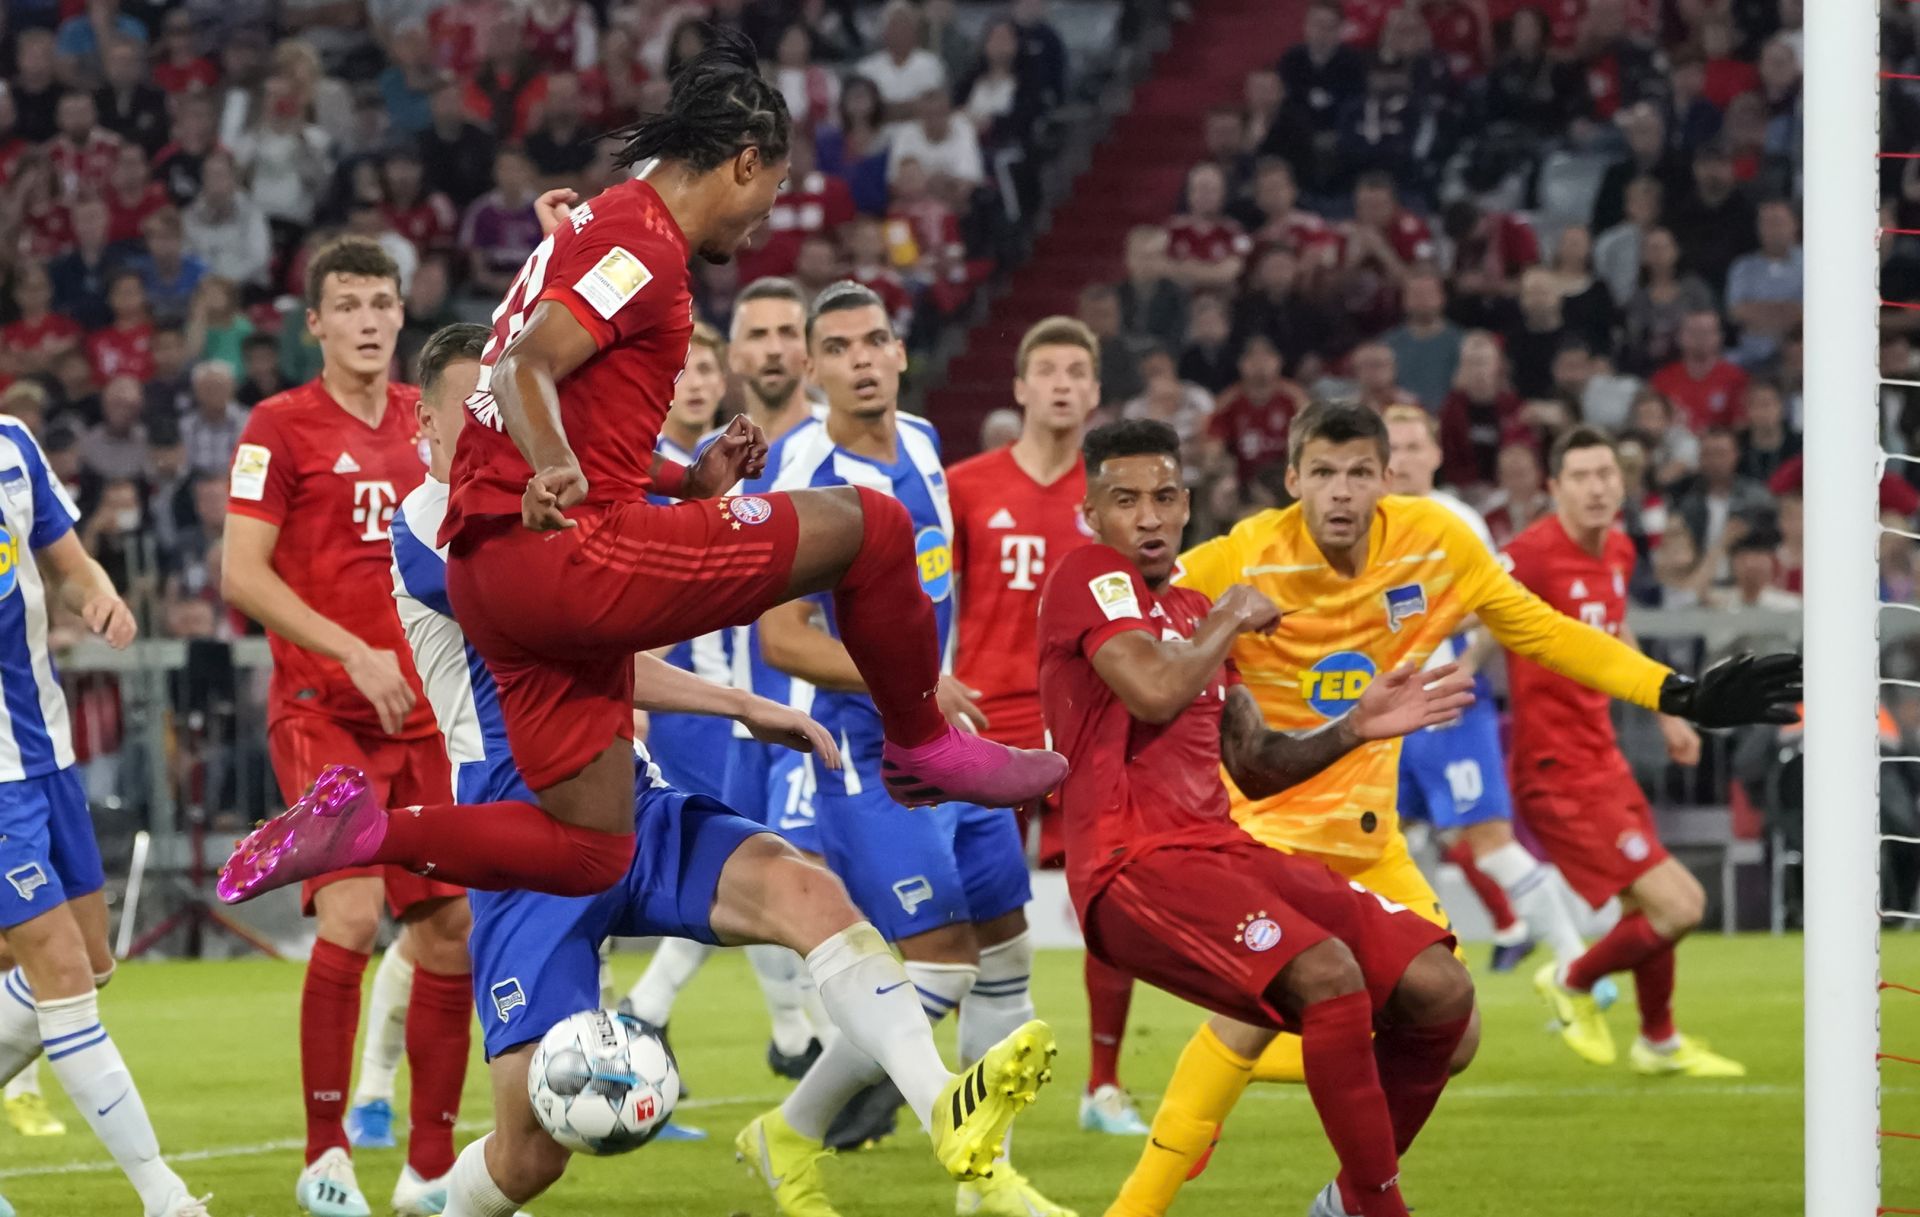 epa07776671 Bayern's Serge Gnabry (C) in action during the German Bundesliga soccer match between FC Bayern Munich and Hertha BSC Berlin in Munich, Germany, 16 August 2019.  EPA/RONALD WITTEK CONDITIONS - ATTENTION: The DFL regulations prohibit any use of photographs as image sequences and/or quasi-video.